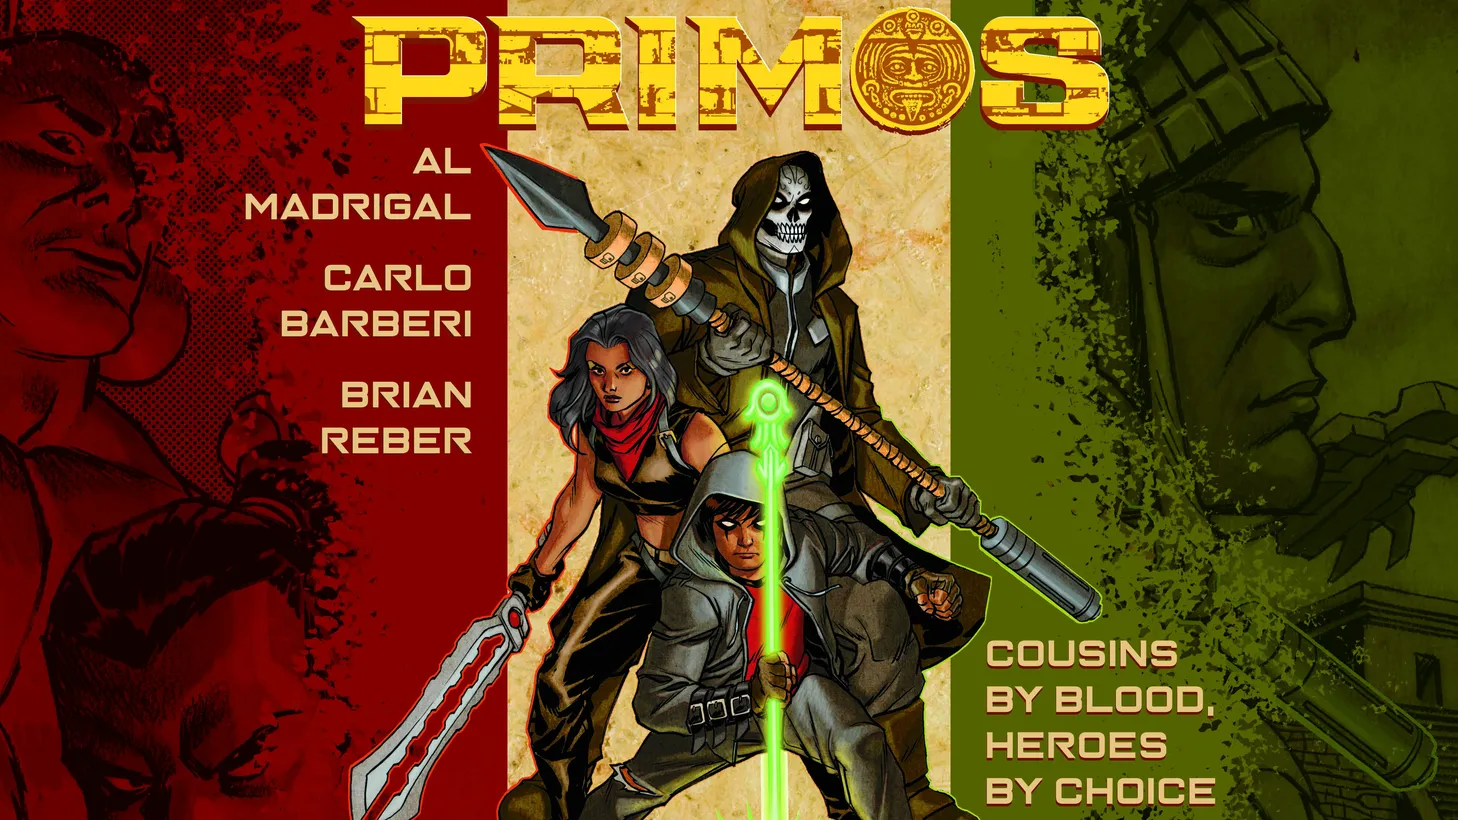 “Primos” is set between Mexico and LA, focusing on cousins Ricky, Javier, and Gina who protect mankind.